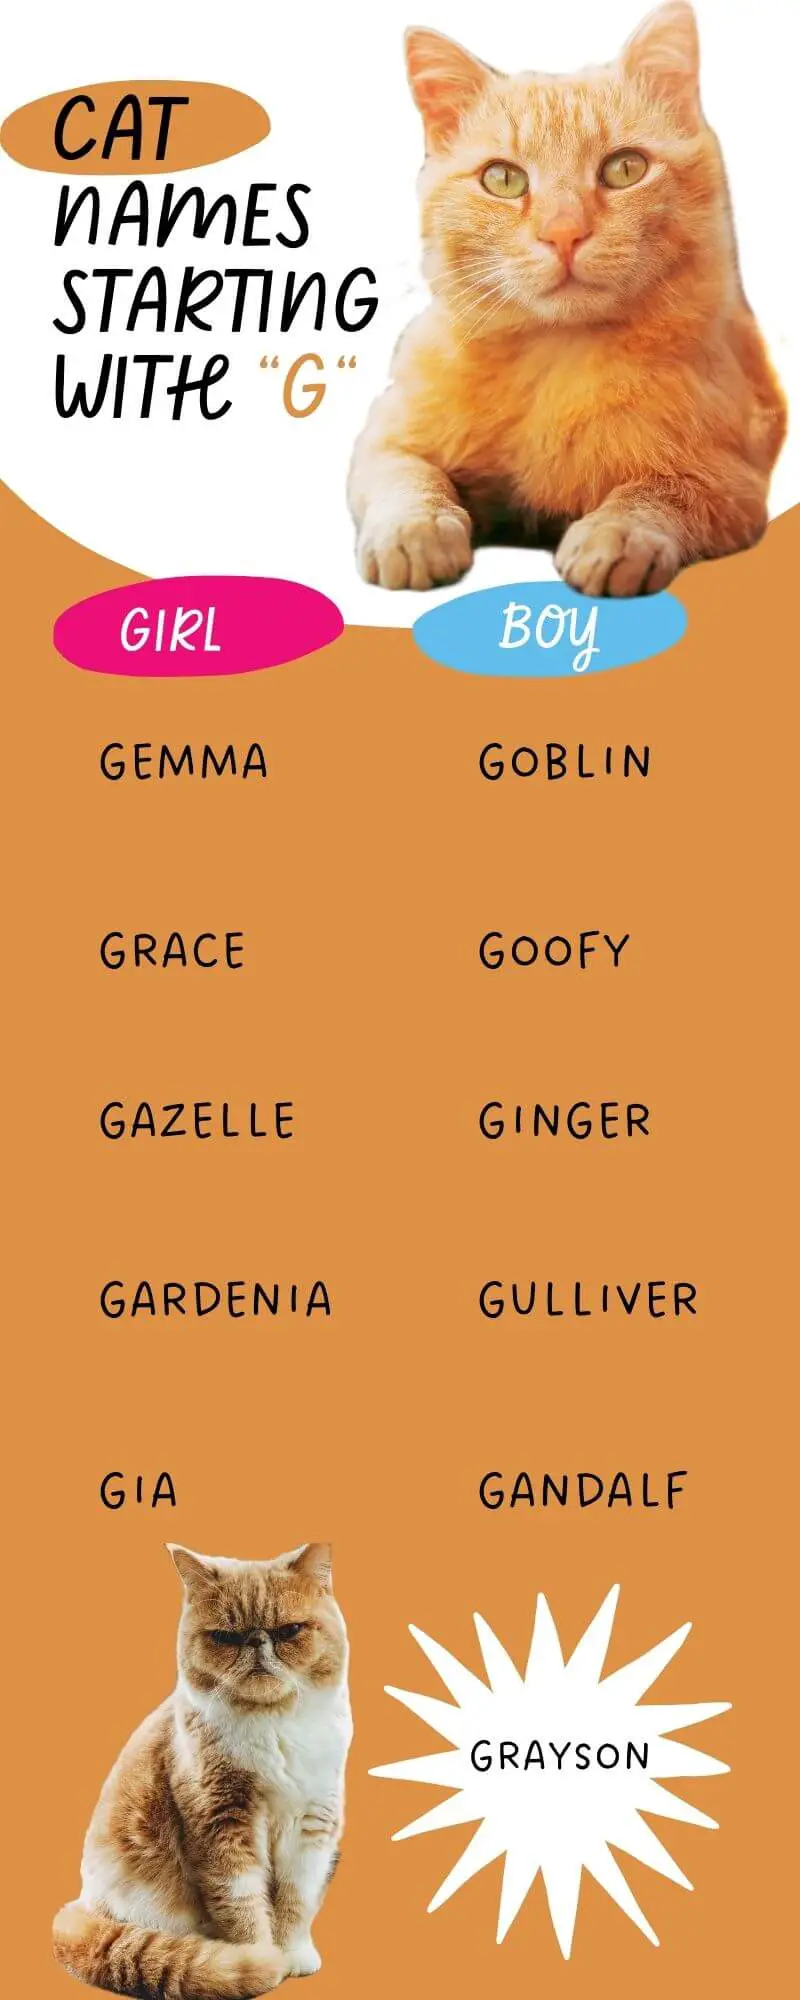 10 Cat Names Starting with G Infographic